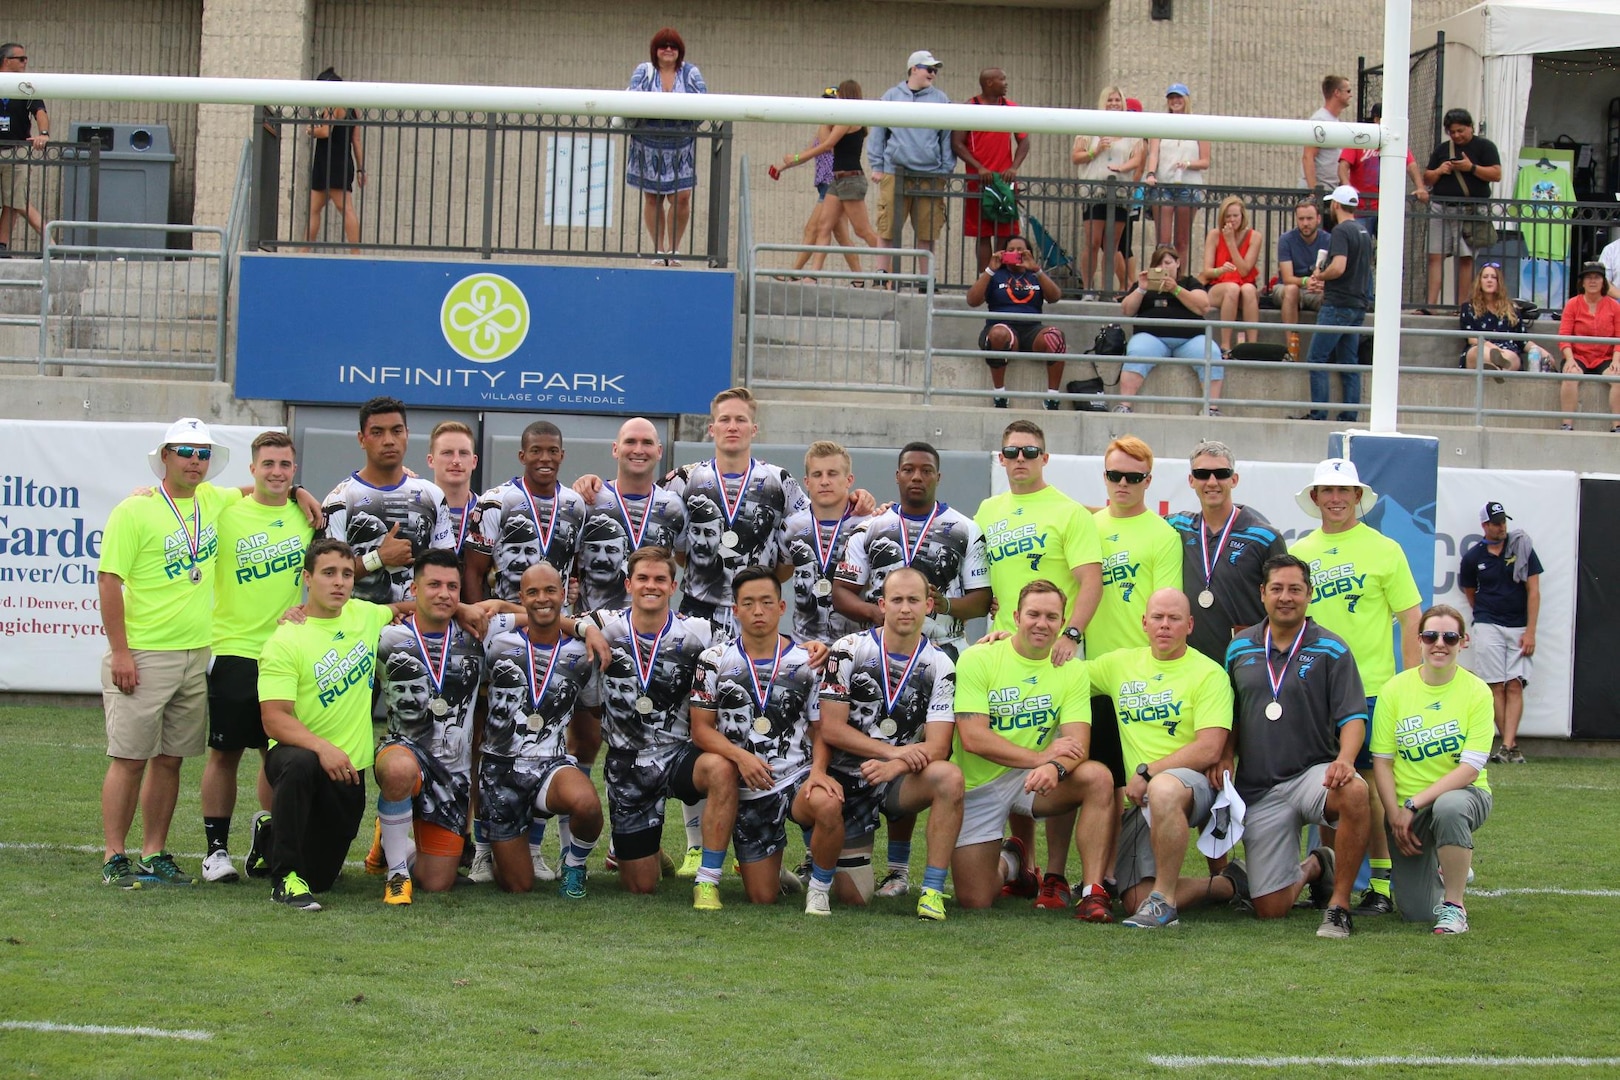 U.S. Air Force captures the 2016 Armed Forces Rugby silver medal for the fifth straight year. 